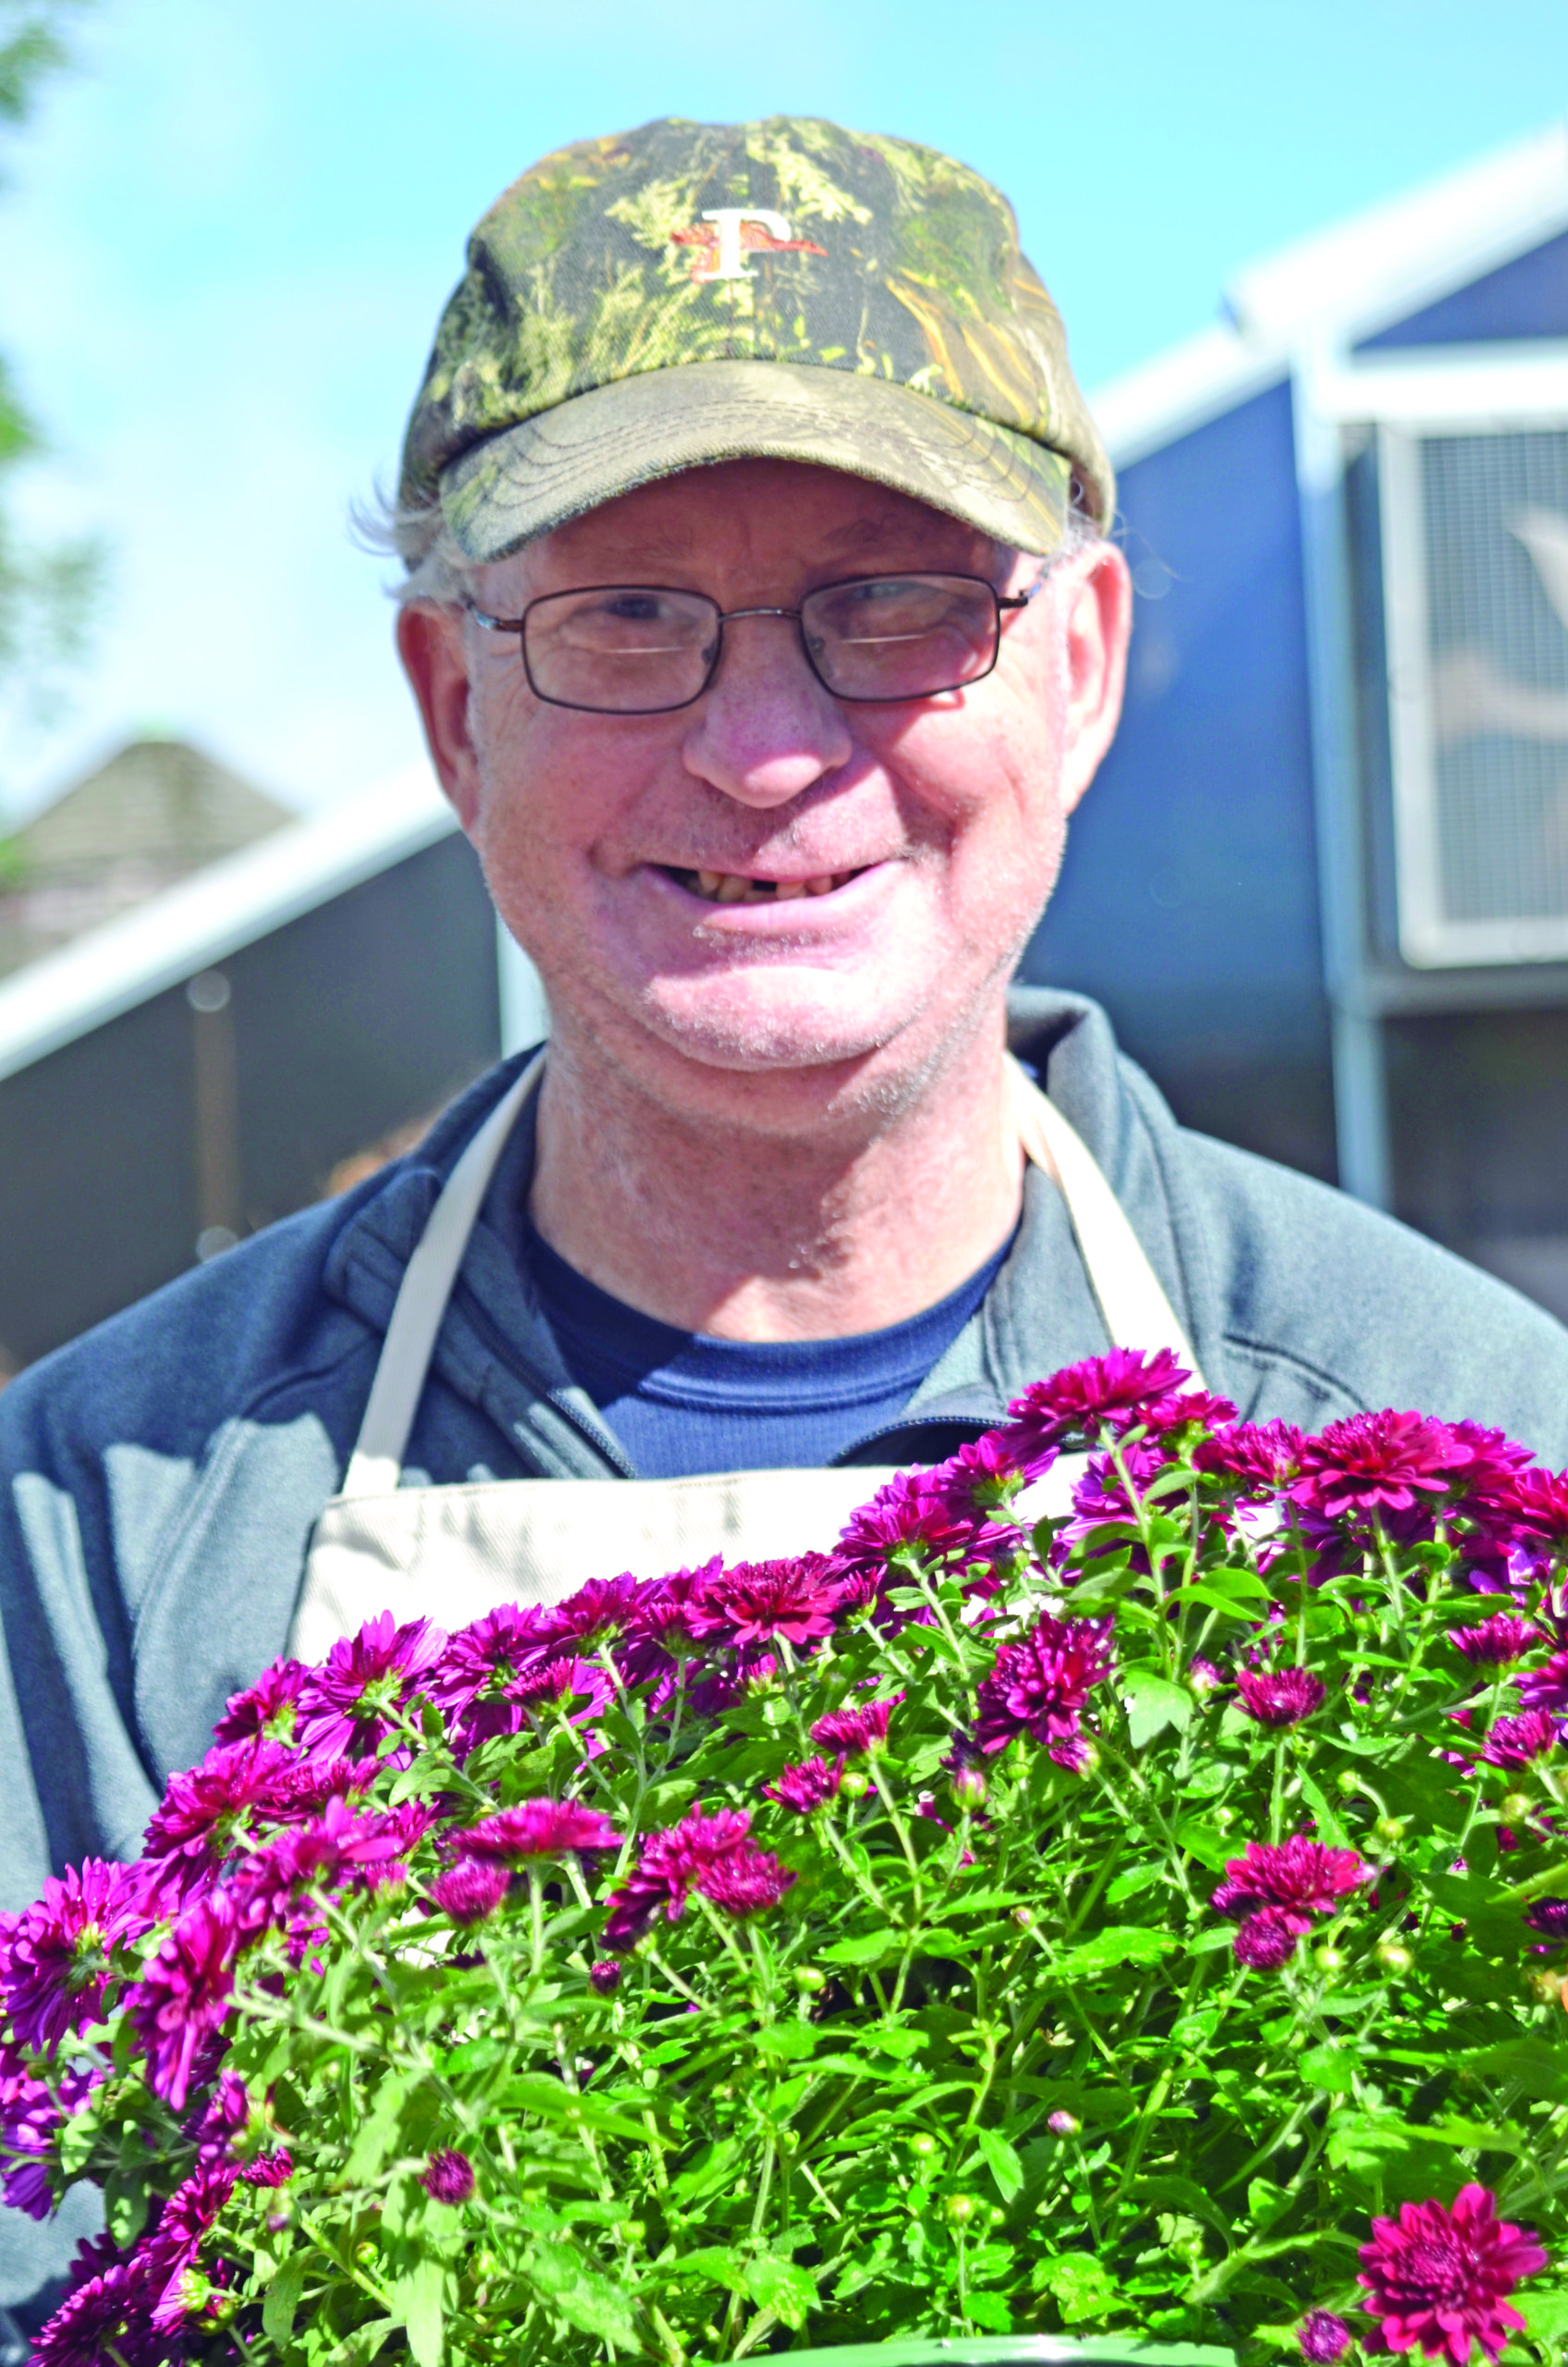 An employee at Smile Farms in Moriches. KIM COVELL